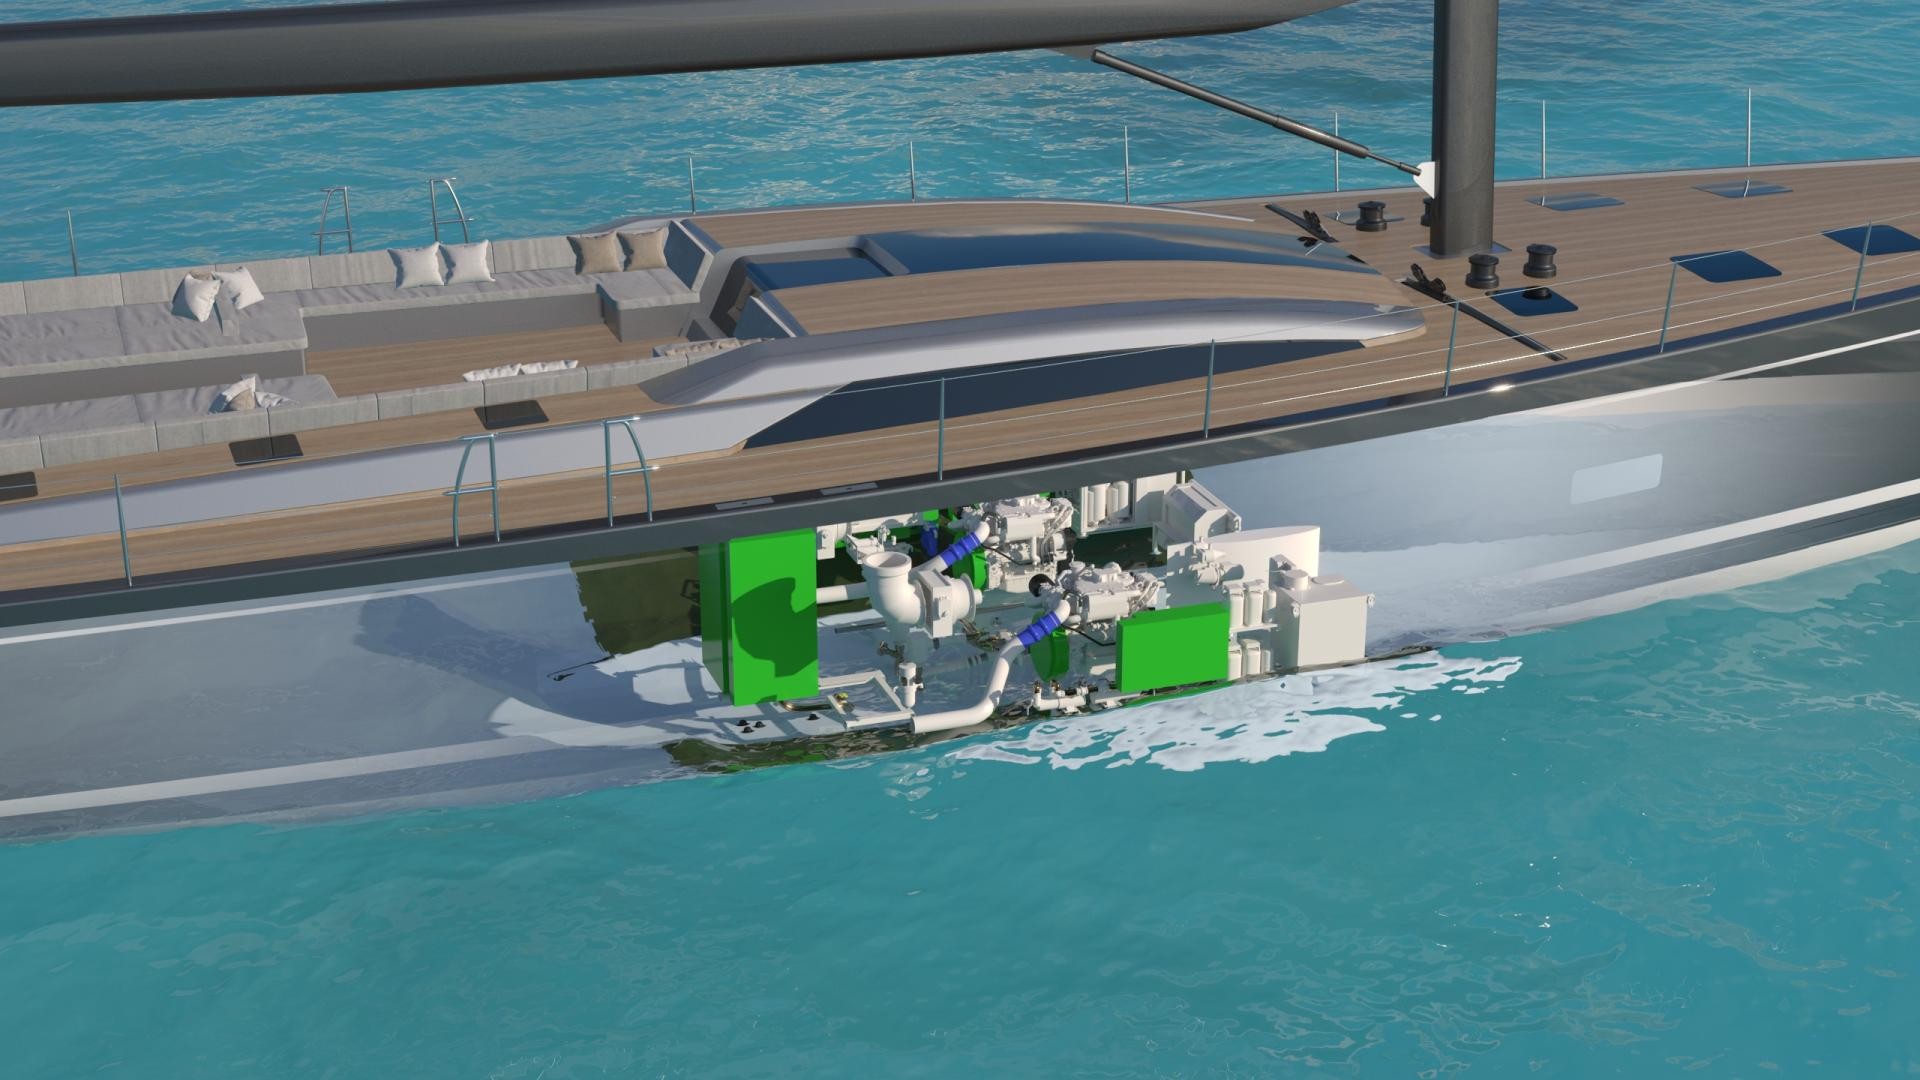 BAE Systems’ very well proven HybridGen technology has now been adapted for the yachting market in partnership with Southern Wind